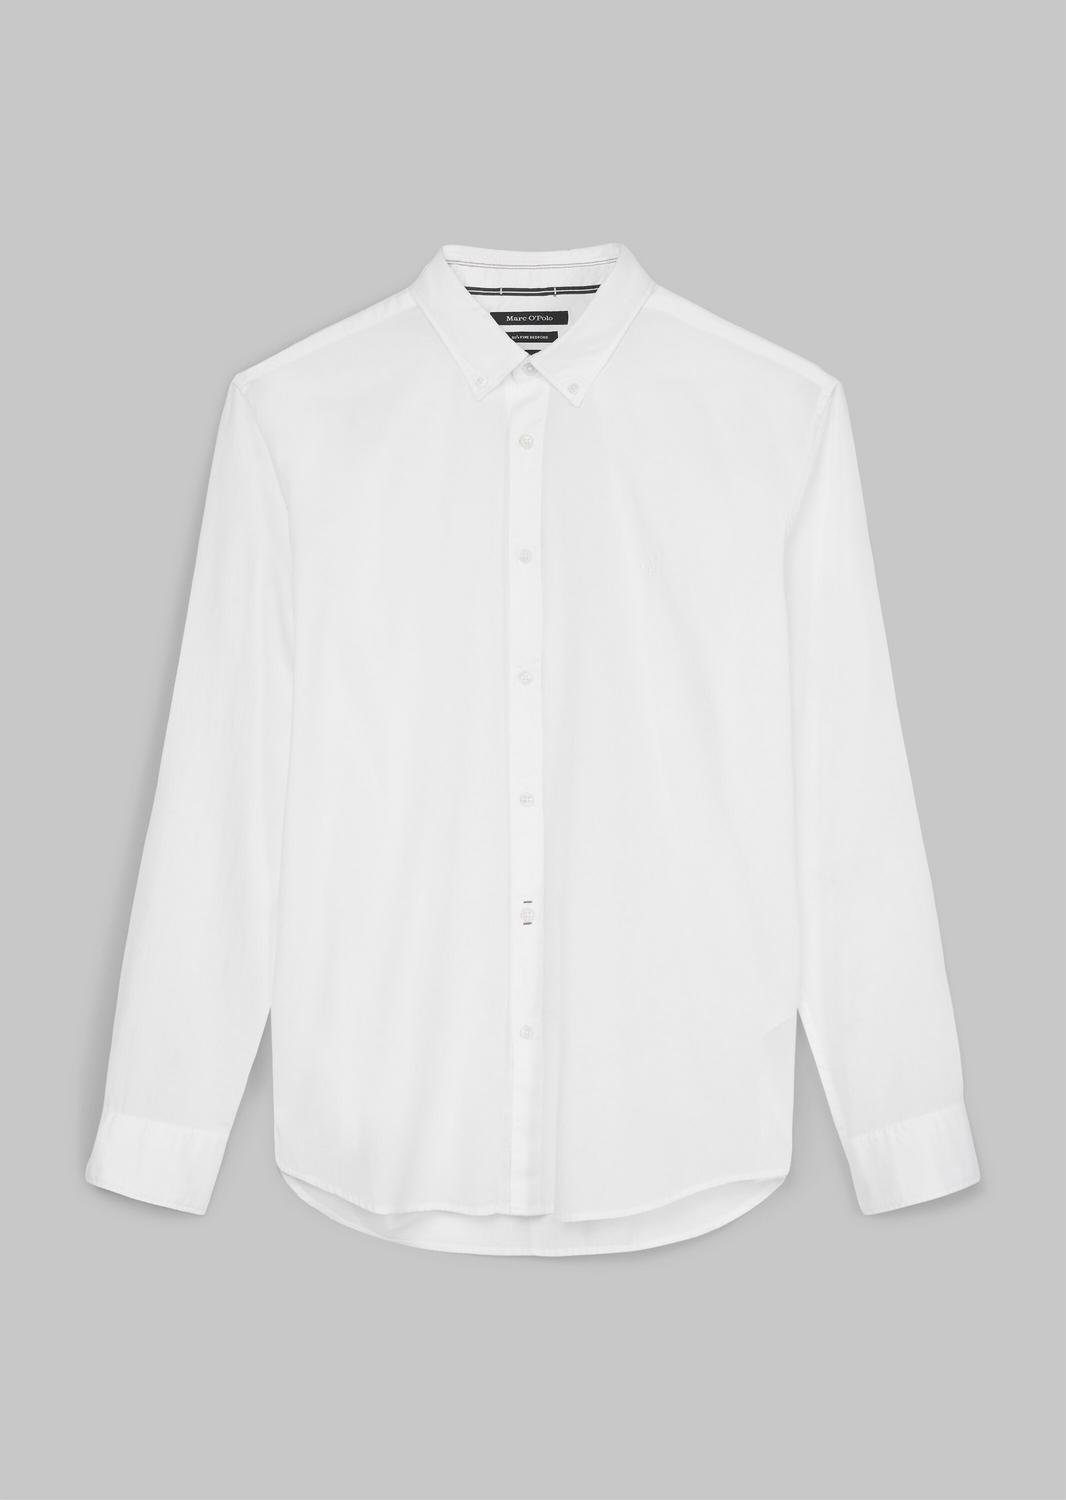 Marc O'Polo Blusenshirt Button down, long sleeve, inserted, white